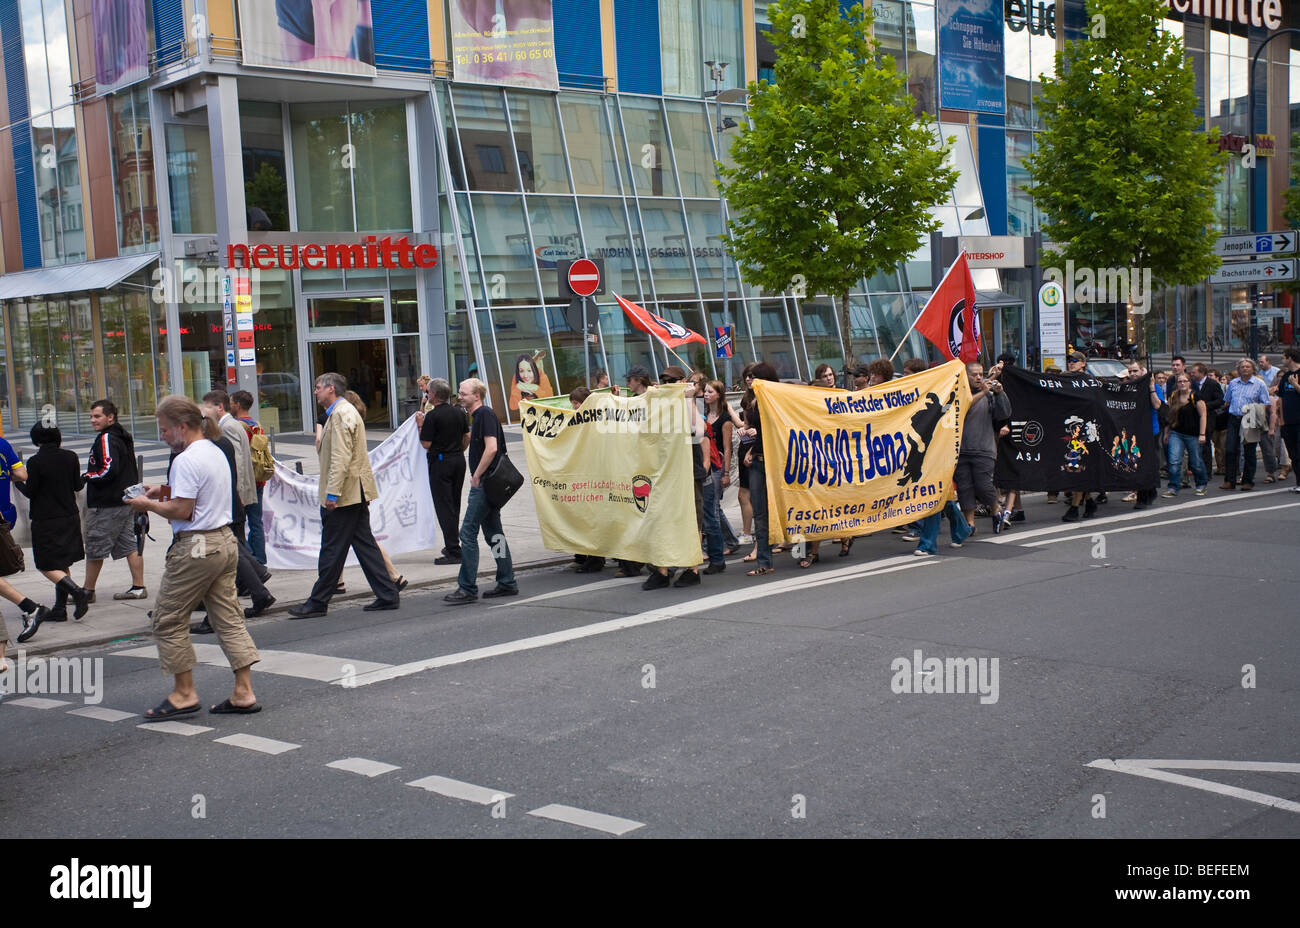 Anti-fascism and anti-racism protest rally in Jena, Thuringia, Germany Stock Photo